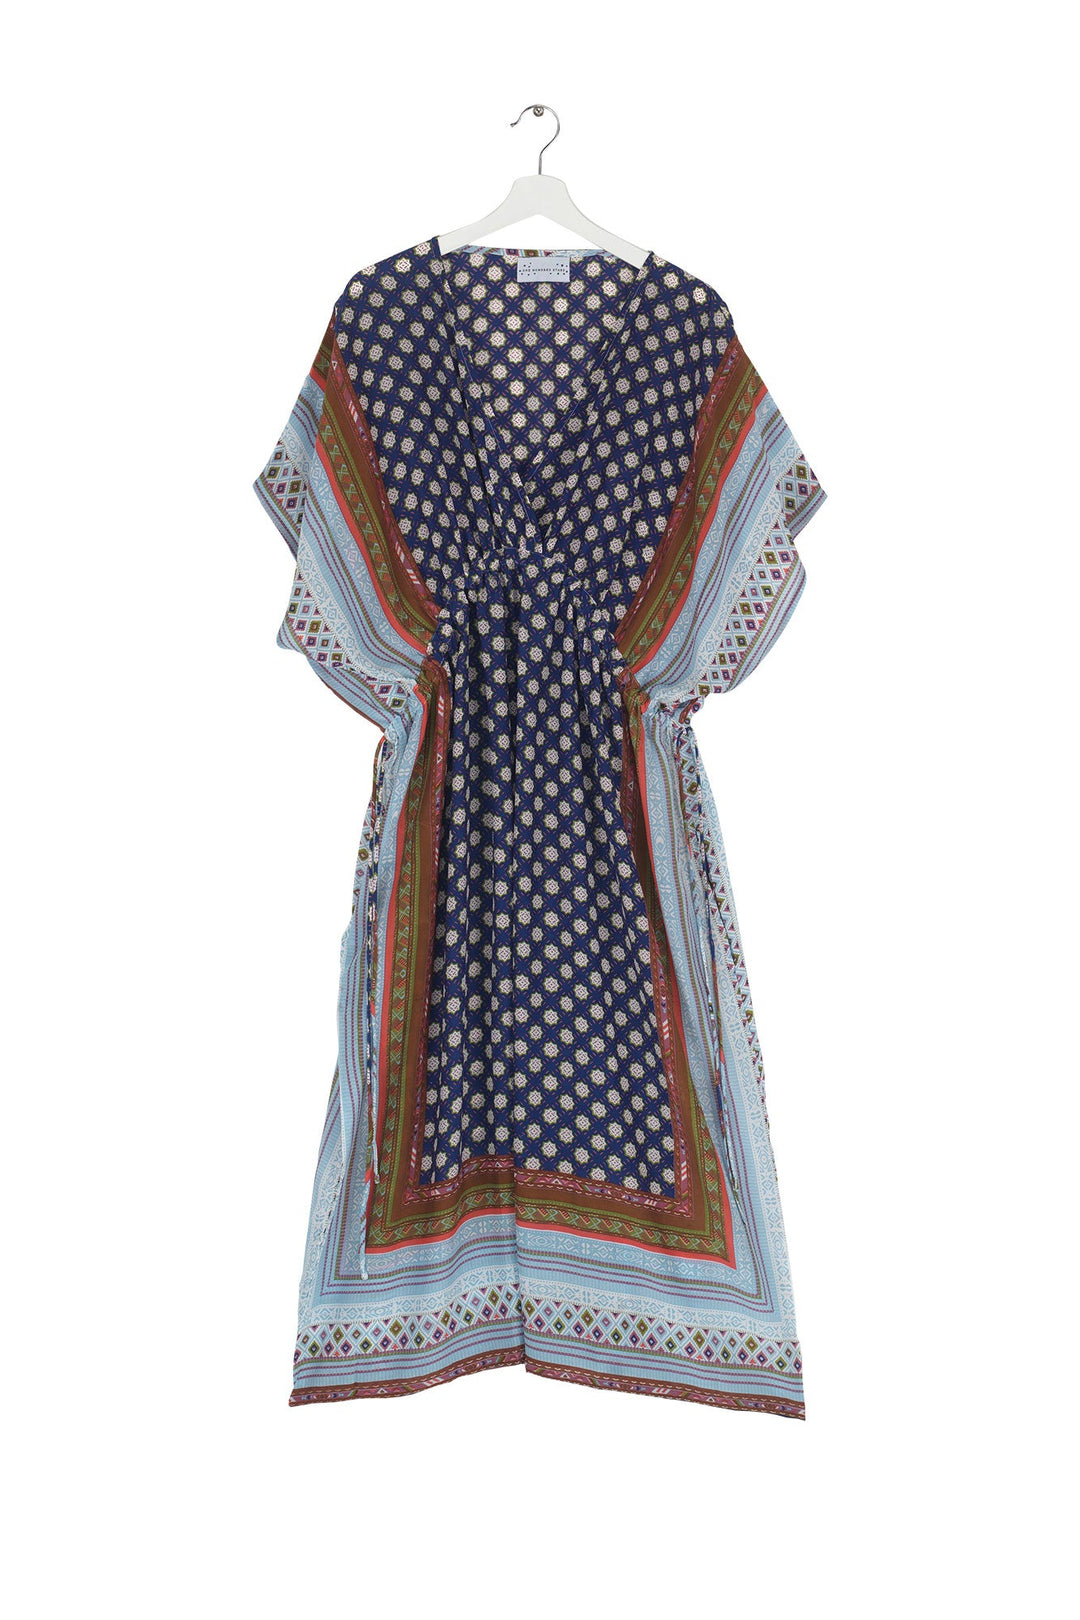 Women's lightweight beach cover up dress with tie waist in indigo with moorish print by One Hundred Stars